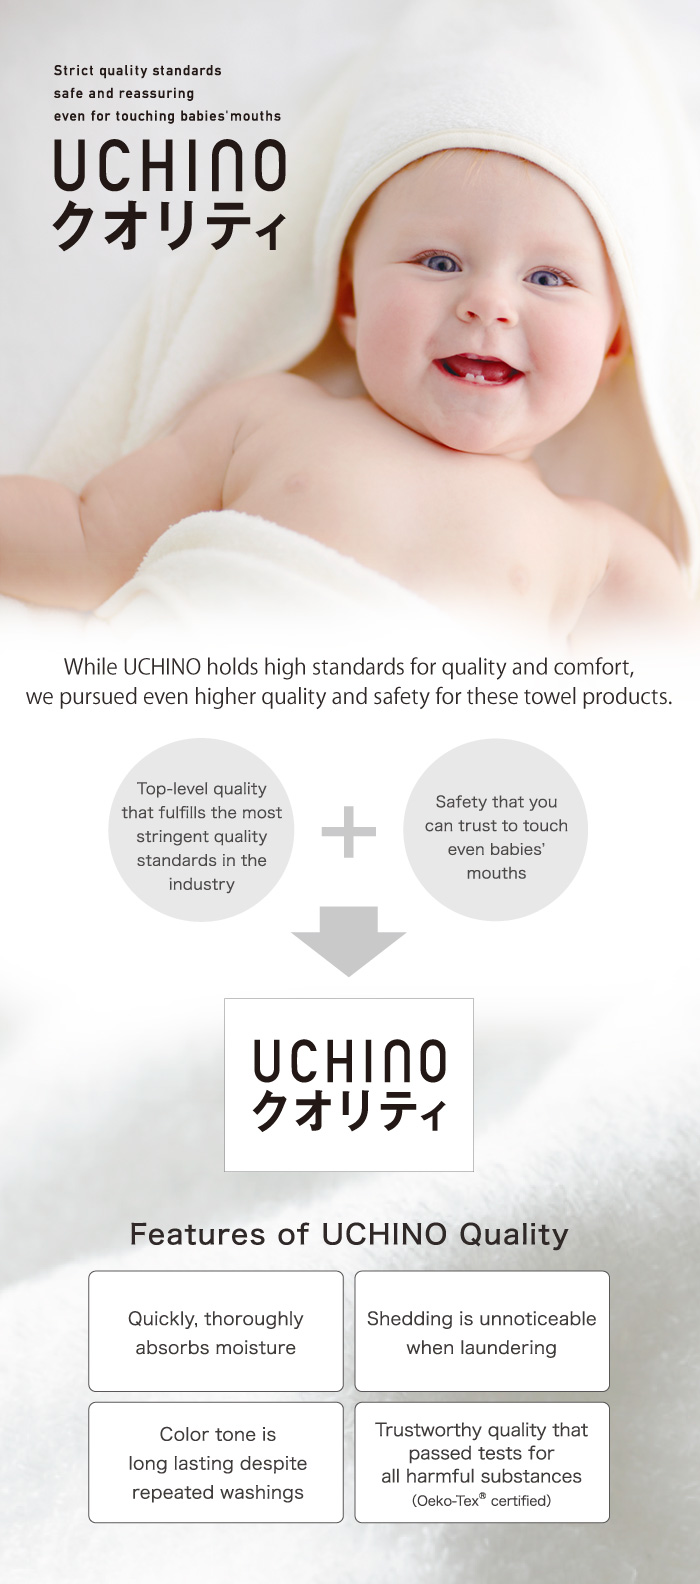 UCHINO holds high standards for quality and comfort, and we pursued even higher quality and safety for these towel products.
Superb quality that meets the most stringent quality standards in the industry+Safety that you can trust to touch even babies’ mouths
Features●Quickly, thoroughly absorbs moisture●Shedding is unnoticeable when laundering●Color tone lasts despite repeated washings●Trustworthy quality that passed tests for all harmful substances